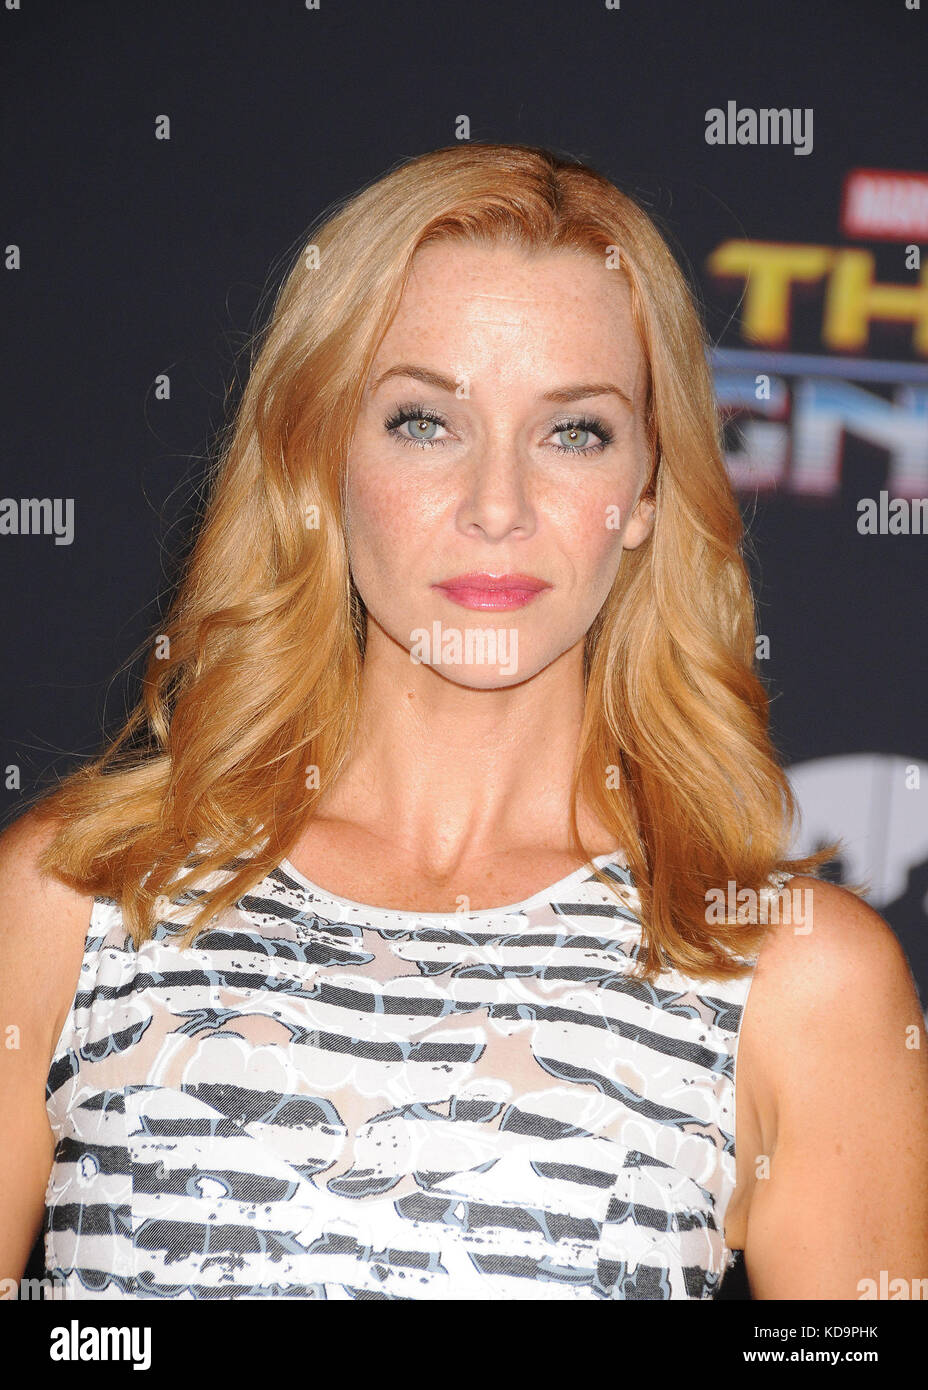 Los Angeles, California, USA. 10th Oct, 2017. October 10th 2017 - Los Angeles, California USA - Actress ANNIE WERSCHING at the ''Thor Ragnarok'' Premiere, held at the El Capitan Theater, Hollywood, Los Angeles CA. Credit: Paul Fenton/ZUMA Wire/Alamy Live News Stock Photo